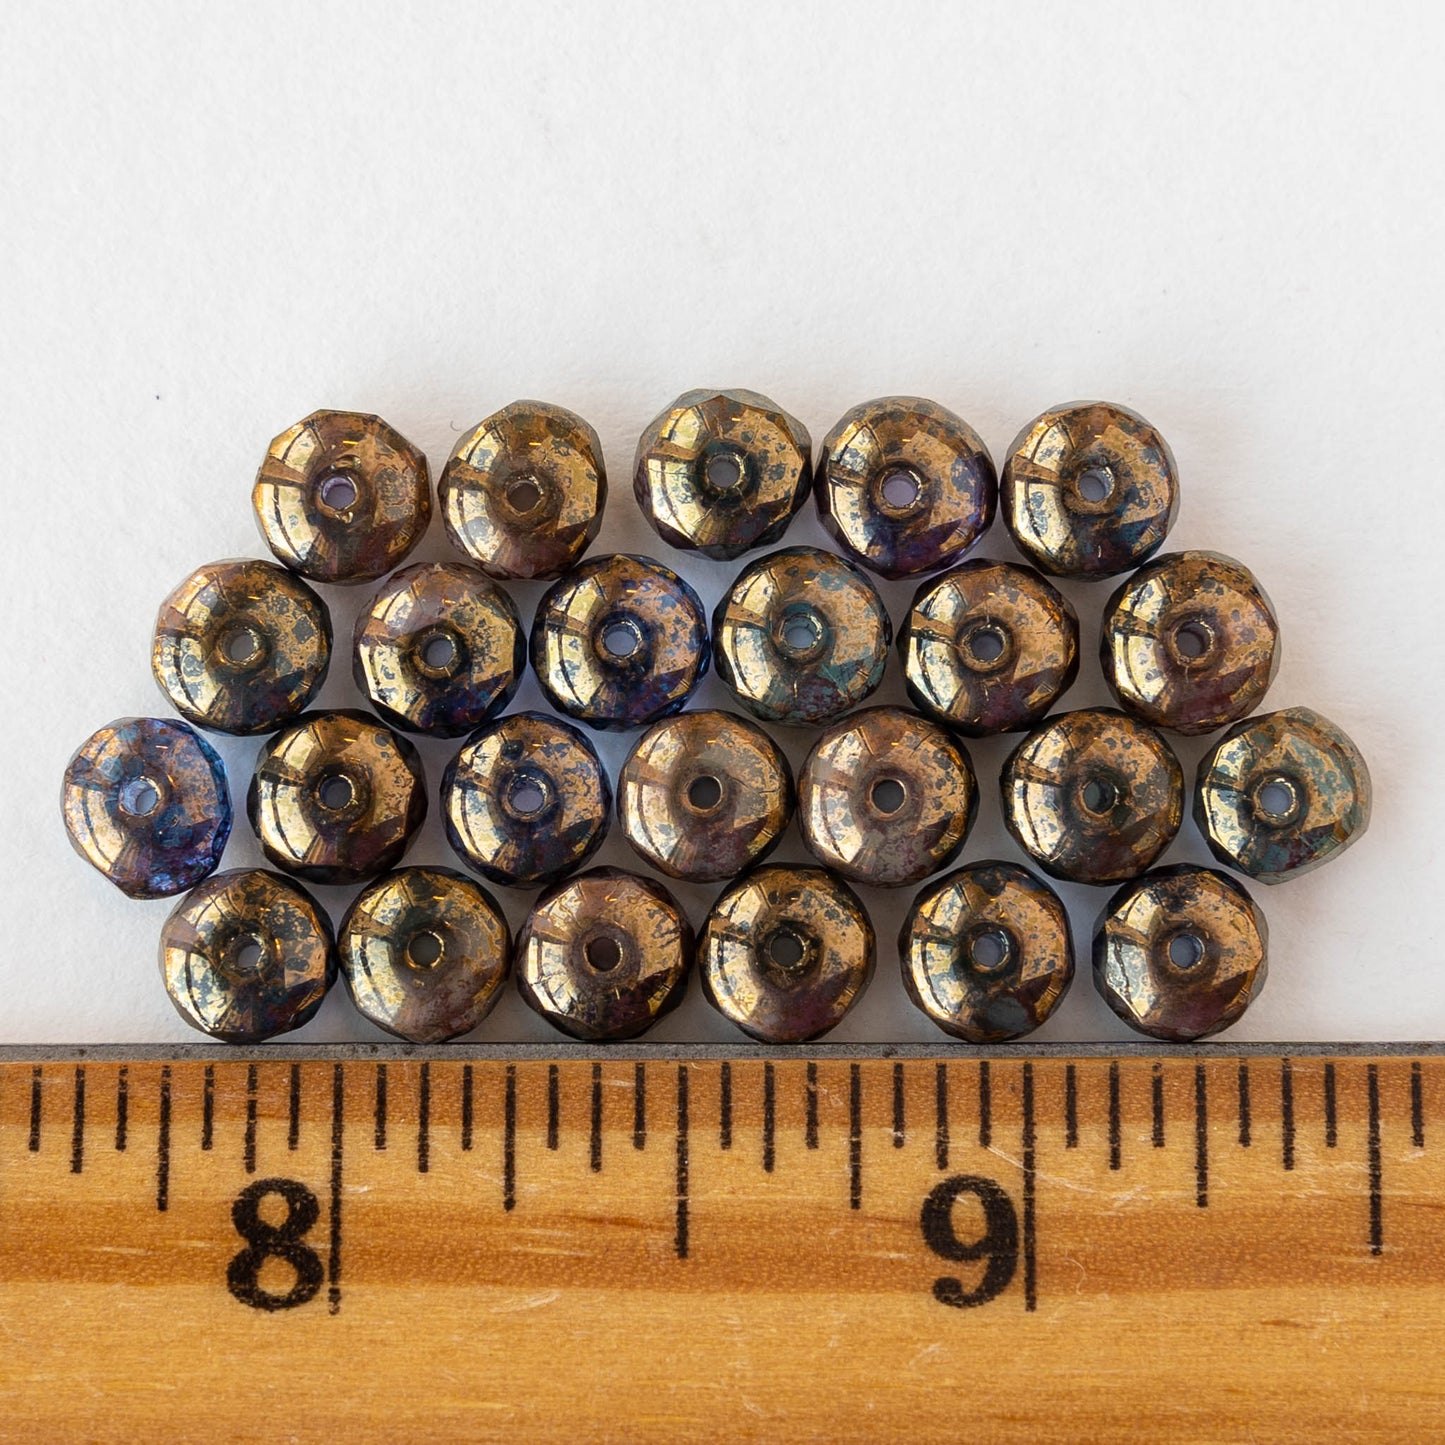 5x7mm Rondelles - Sapphire Blue with Purple Gold Luster - 25